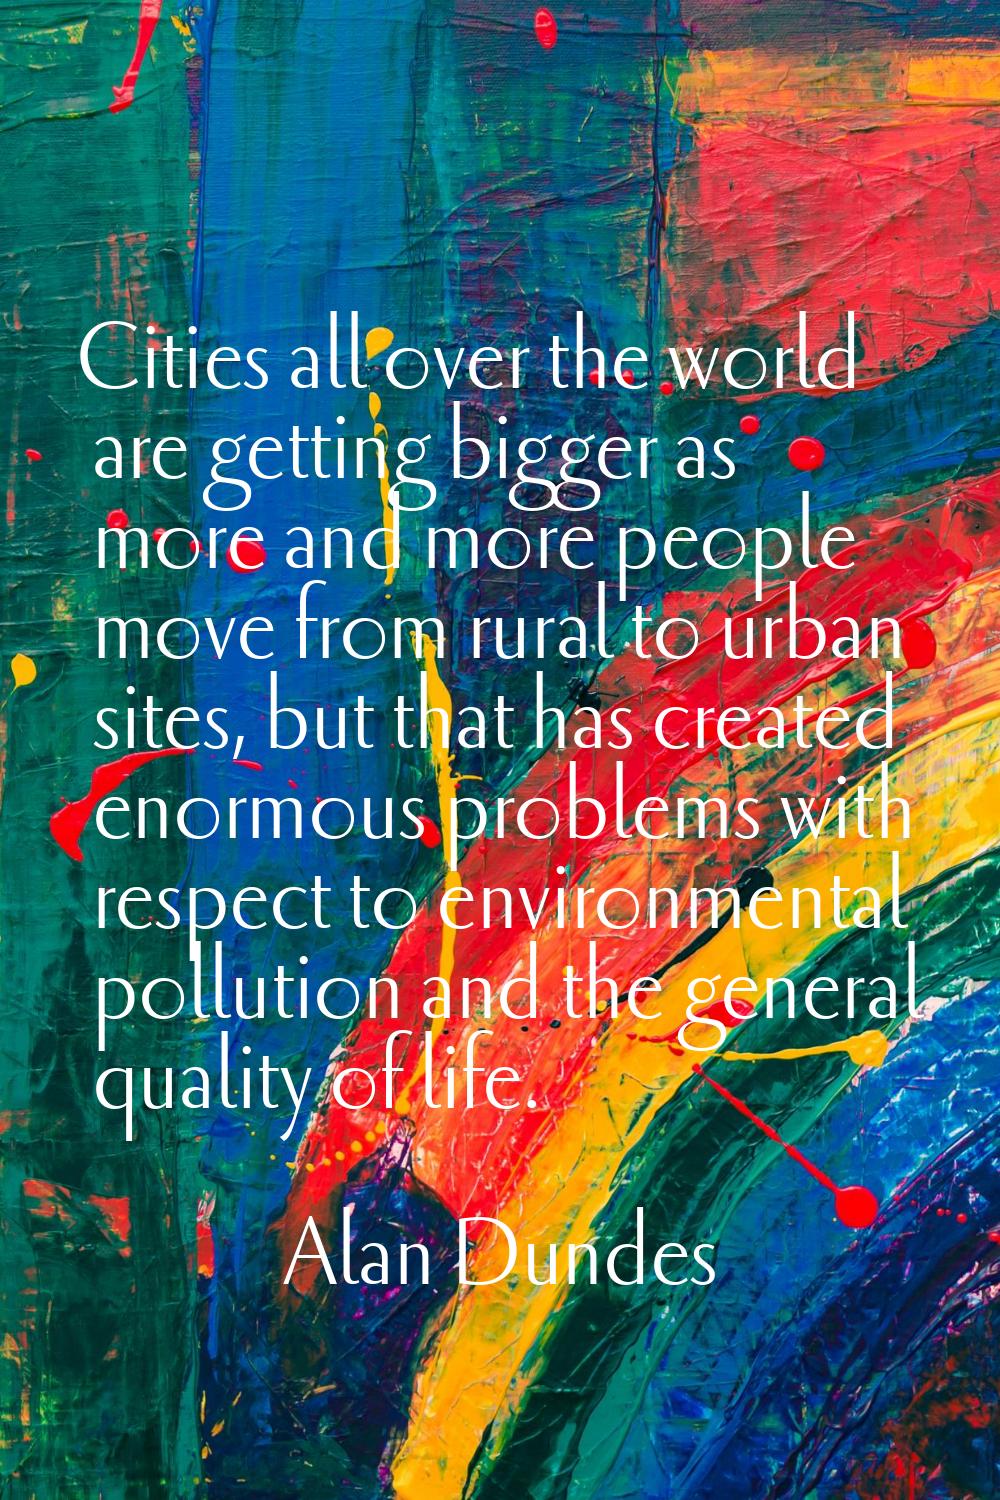 Cities all over the world are getting bigger as more and more people move from rural to urban sites